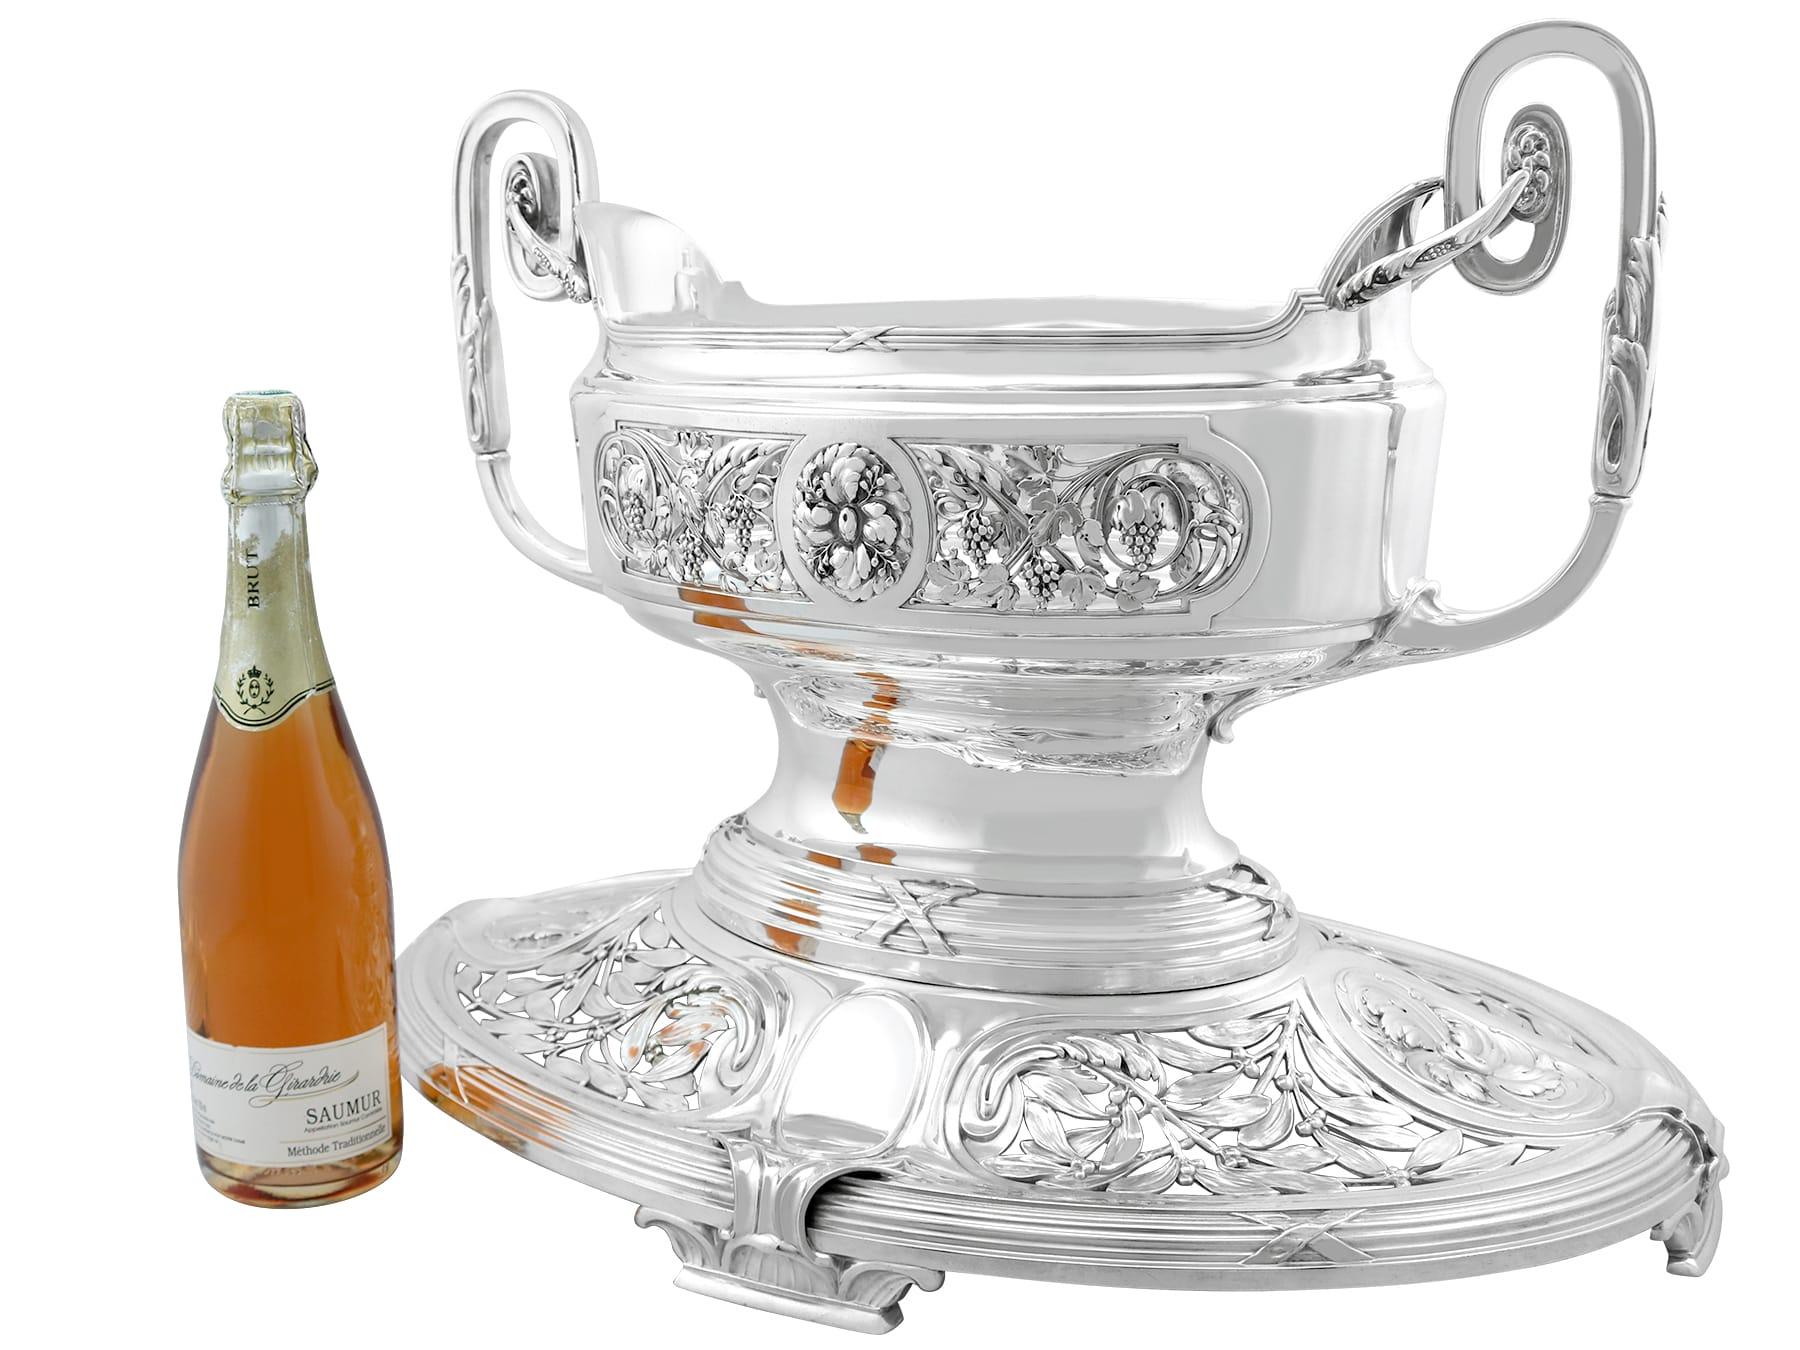 A magnificent, fine and impressive, large antique German silver Art Nouveau centrepiece; an addition to our ornamental silverware collection

This magnificent antique German silver centrepiece has an oval rounded form.

The exceptional bowl is